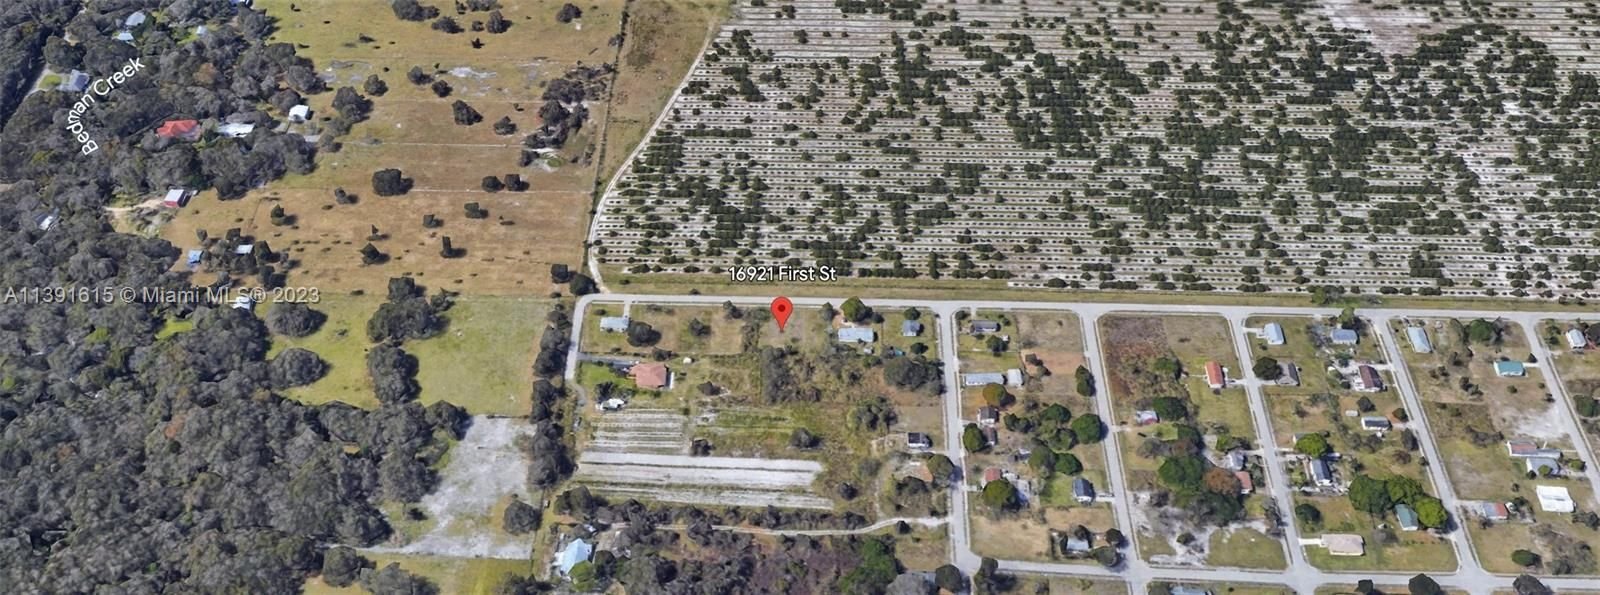 Real estate property located at 16921 First St, Lee County, Lehigh Acres, FL